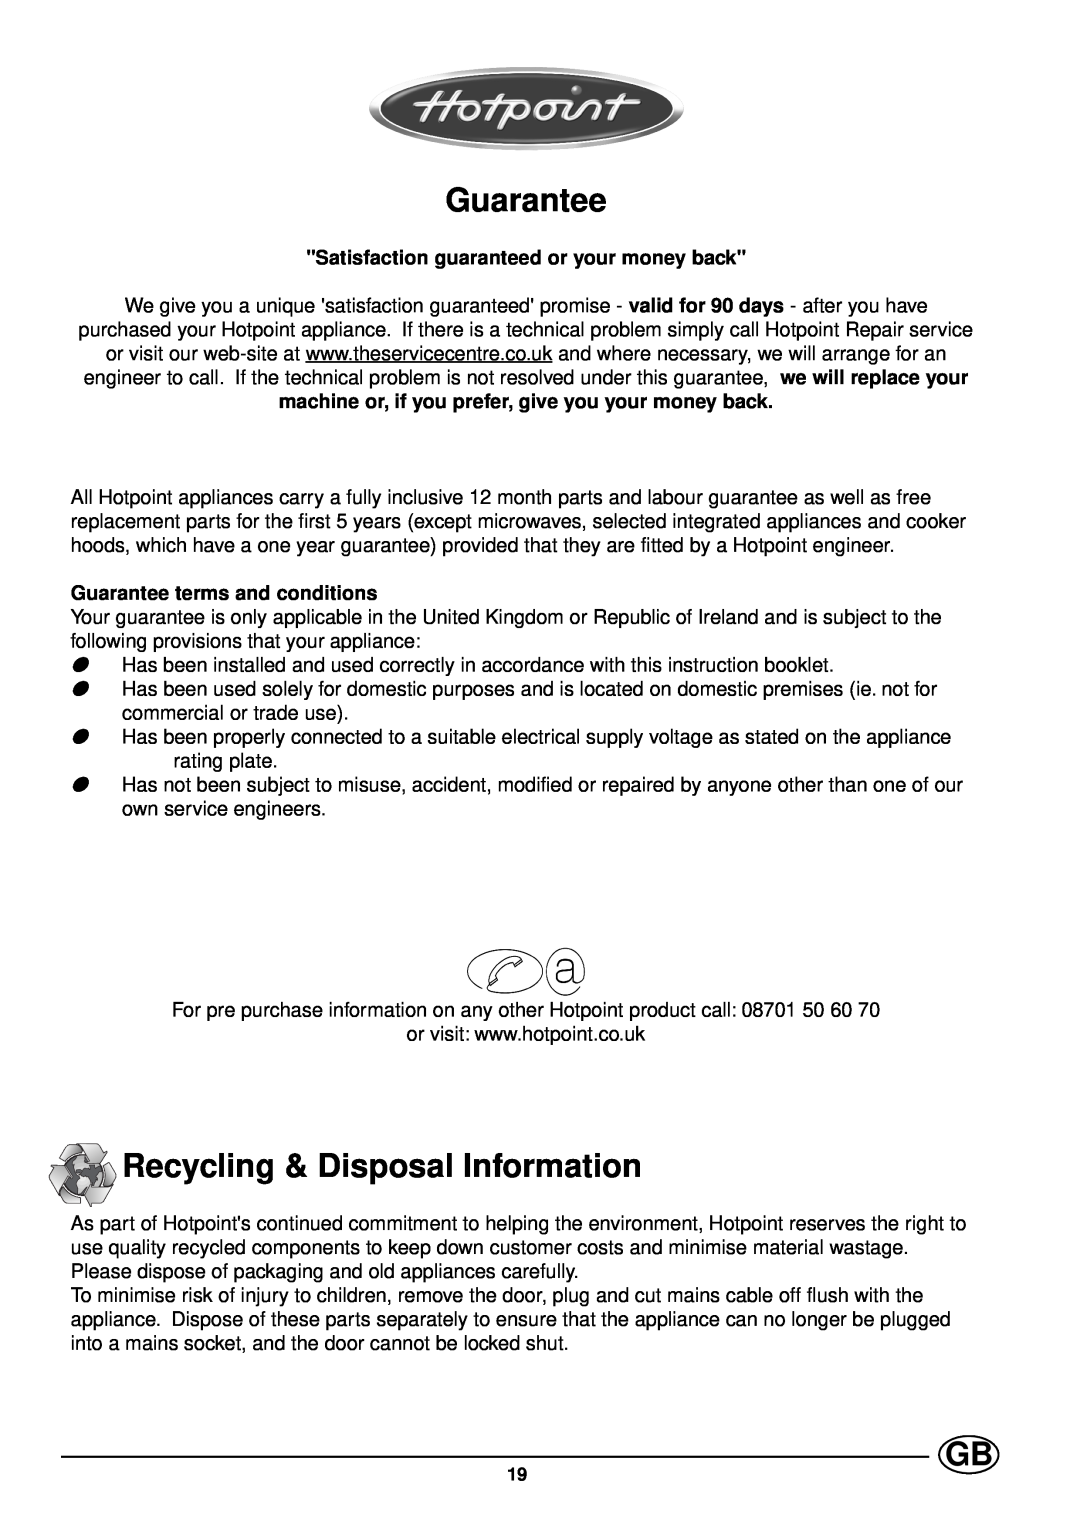 Hotpoint ST87EX manual Guarantee, Recycling & Disposal Information, Satisfaction guaranteed or your money back 